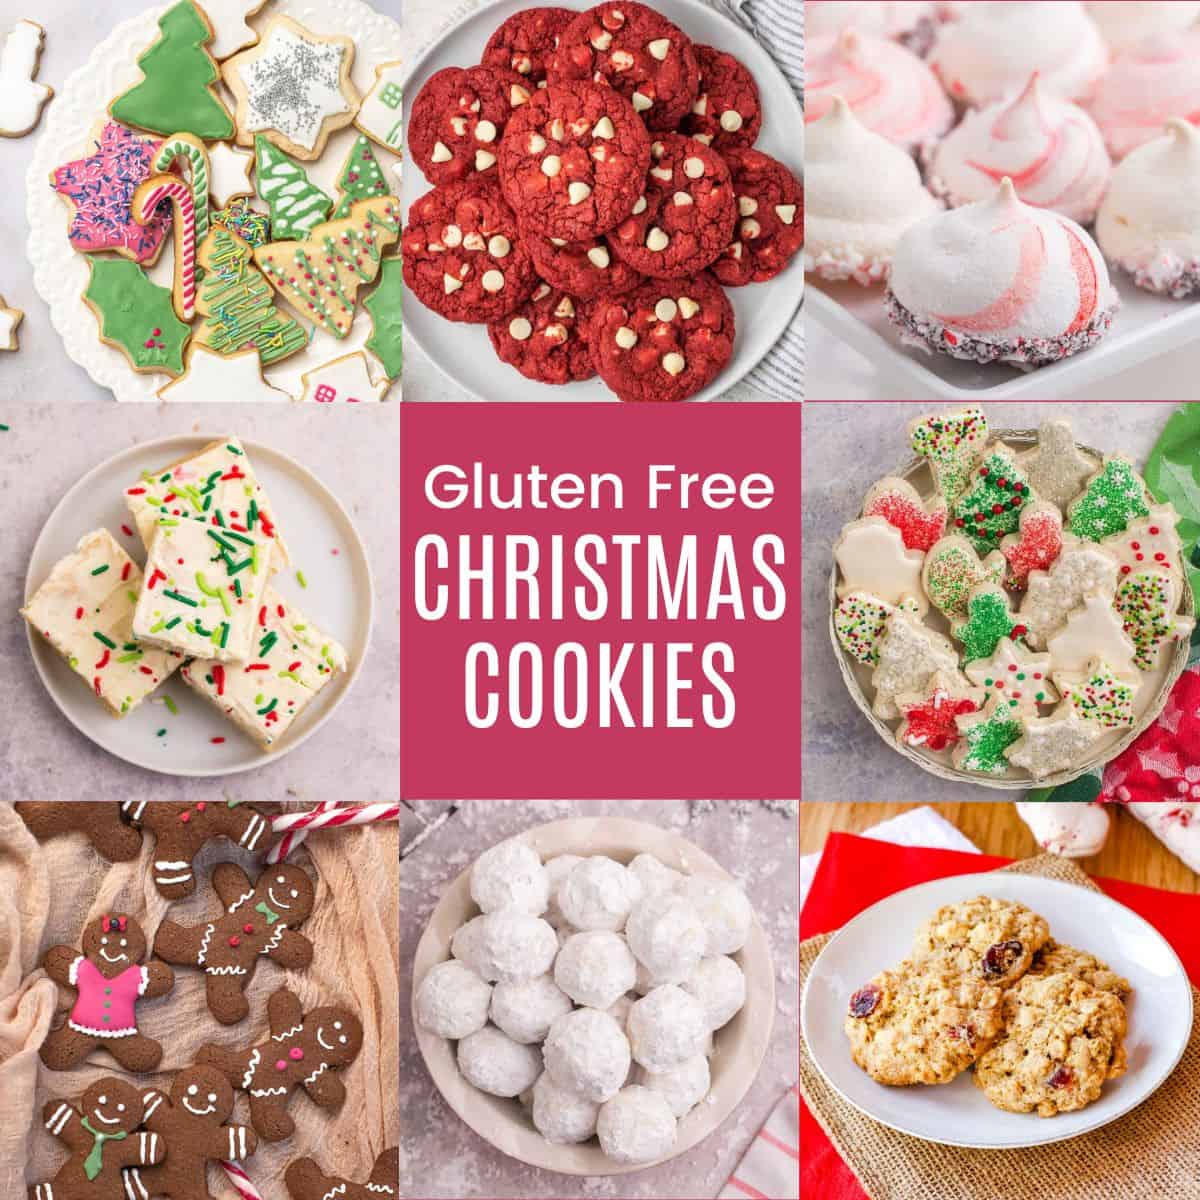 20 Best Gluten-Free Christmas Cookies - and a Recipe!